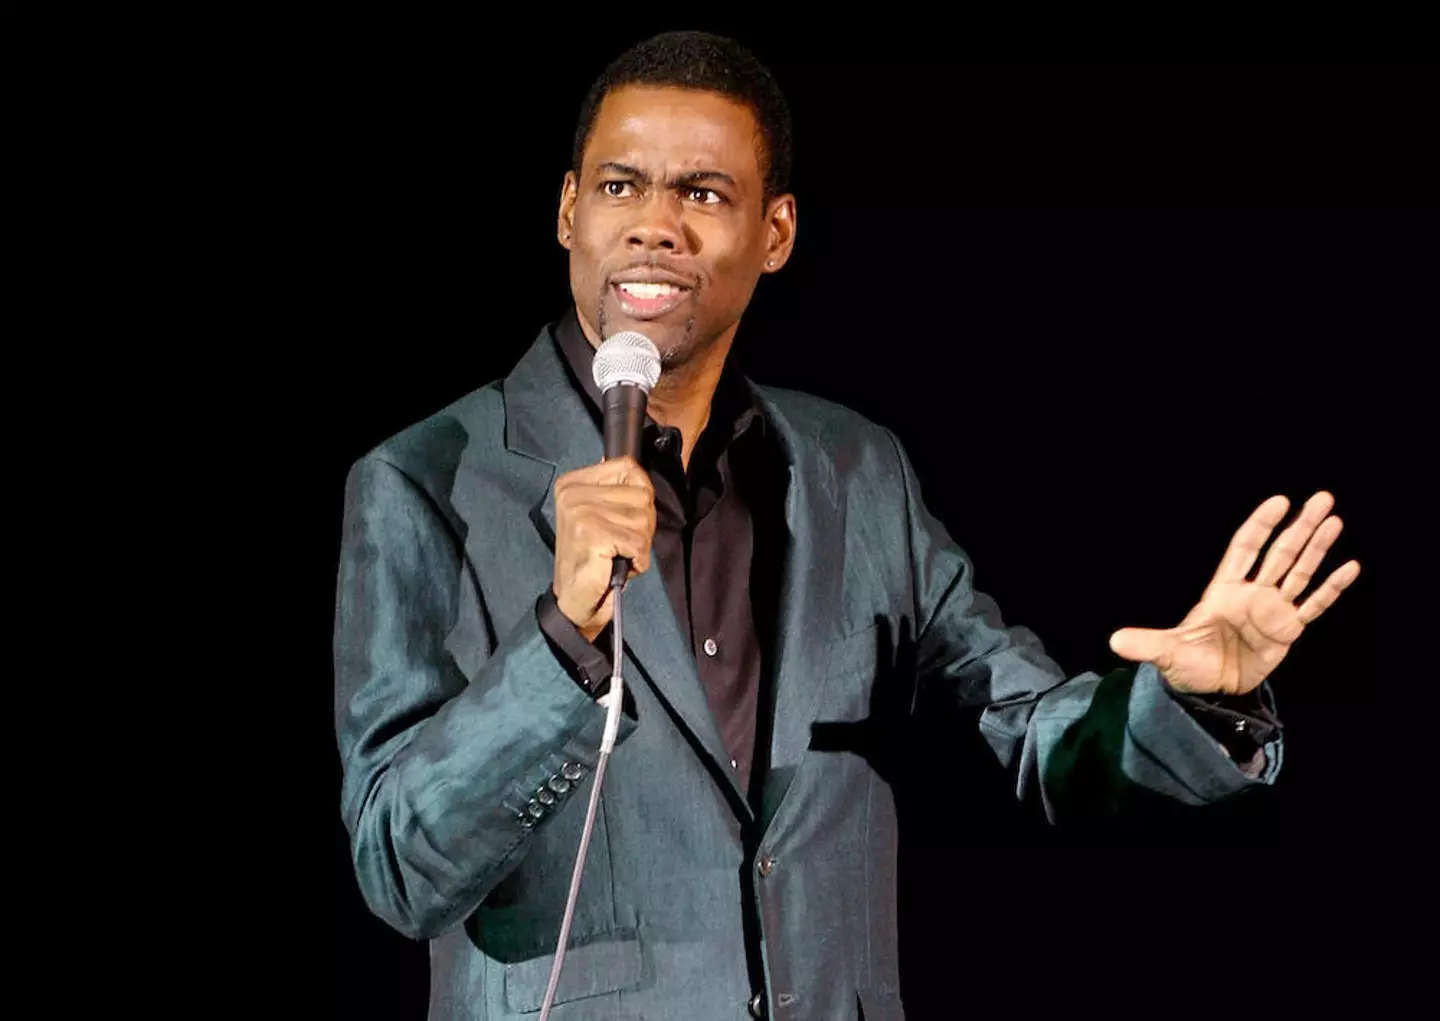 Chris Rock kicked off his first UK tour in five years.